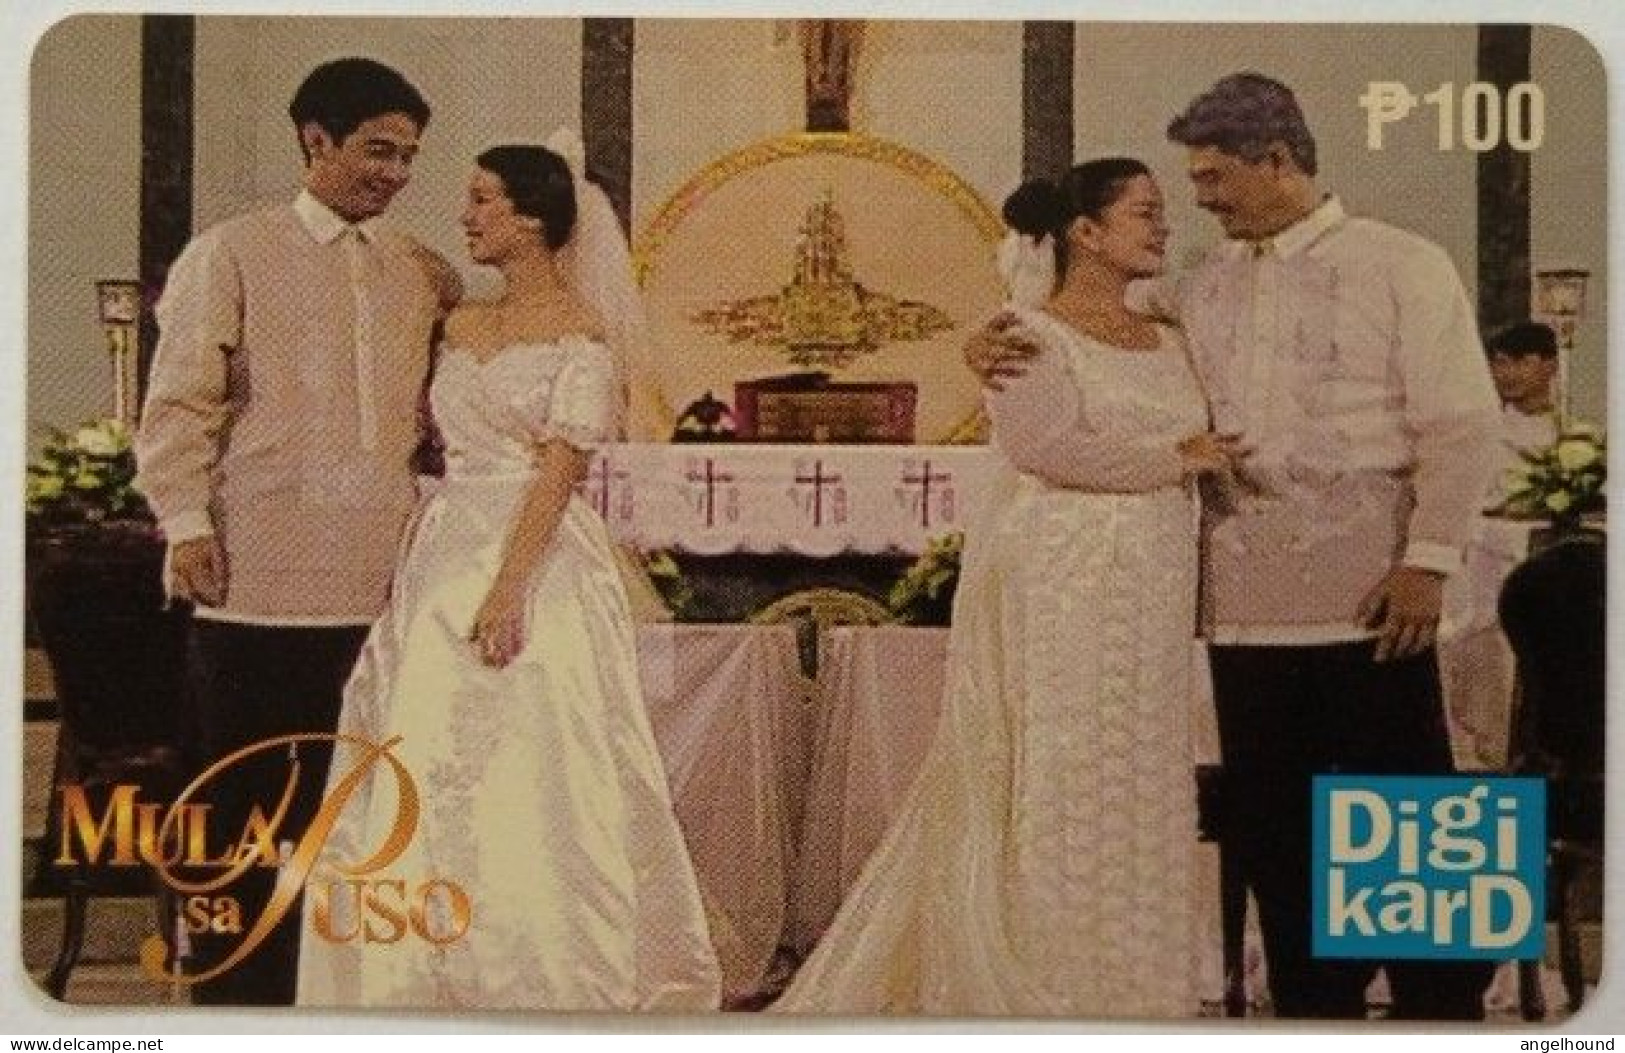 Philippines Digitel P100 Digicard - Mula Sa Puso ( From The Heart ) Popular TV Series - Philippines